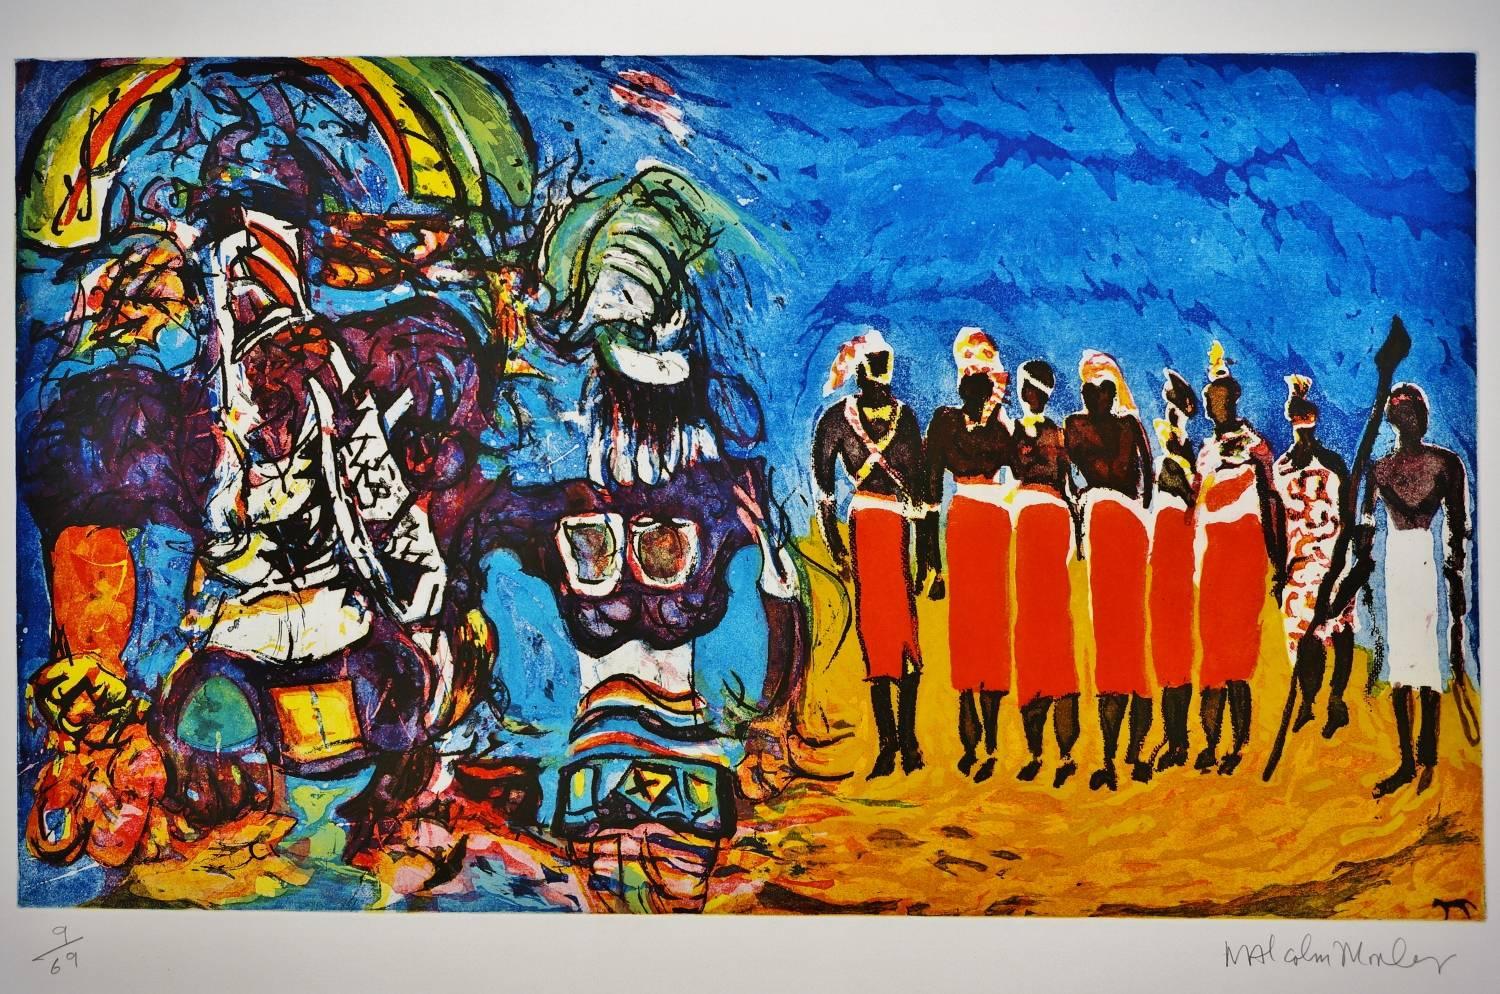 Malcolm Morley print 'Kachina and Masai Ritual' original unframed print from the 'Odysseys of Enoch Suite', 1986, USA. Aquatint and etching, signed in pencil and numbered 9/69 along with the studio stamp. Very good condition.
The 'Odysseys of Enoch